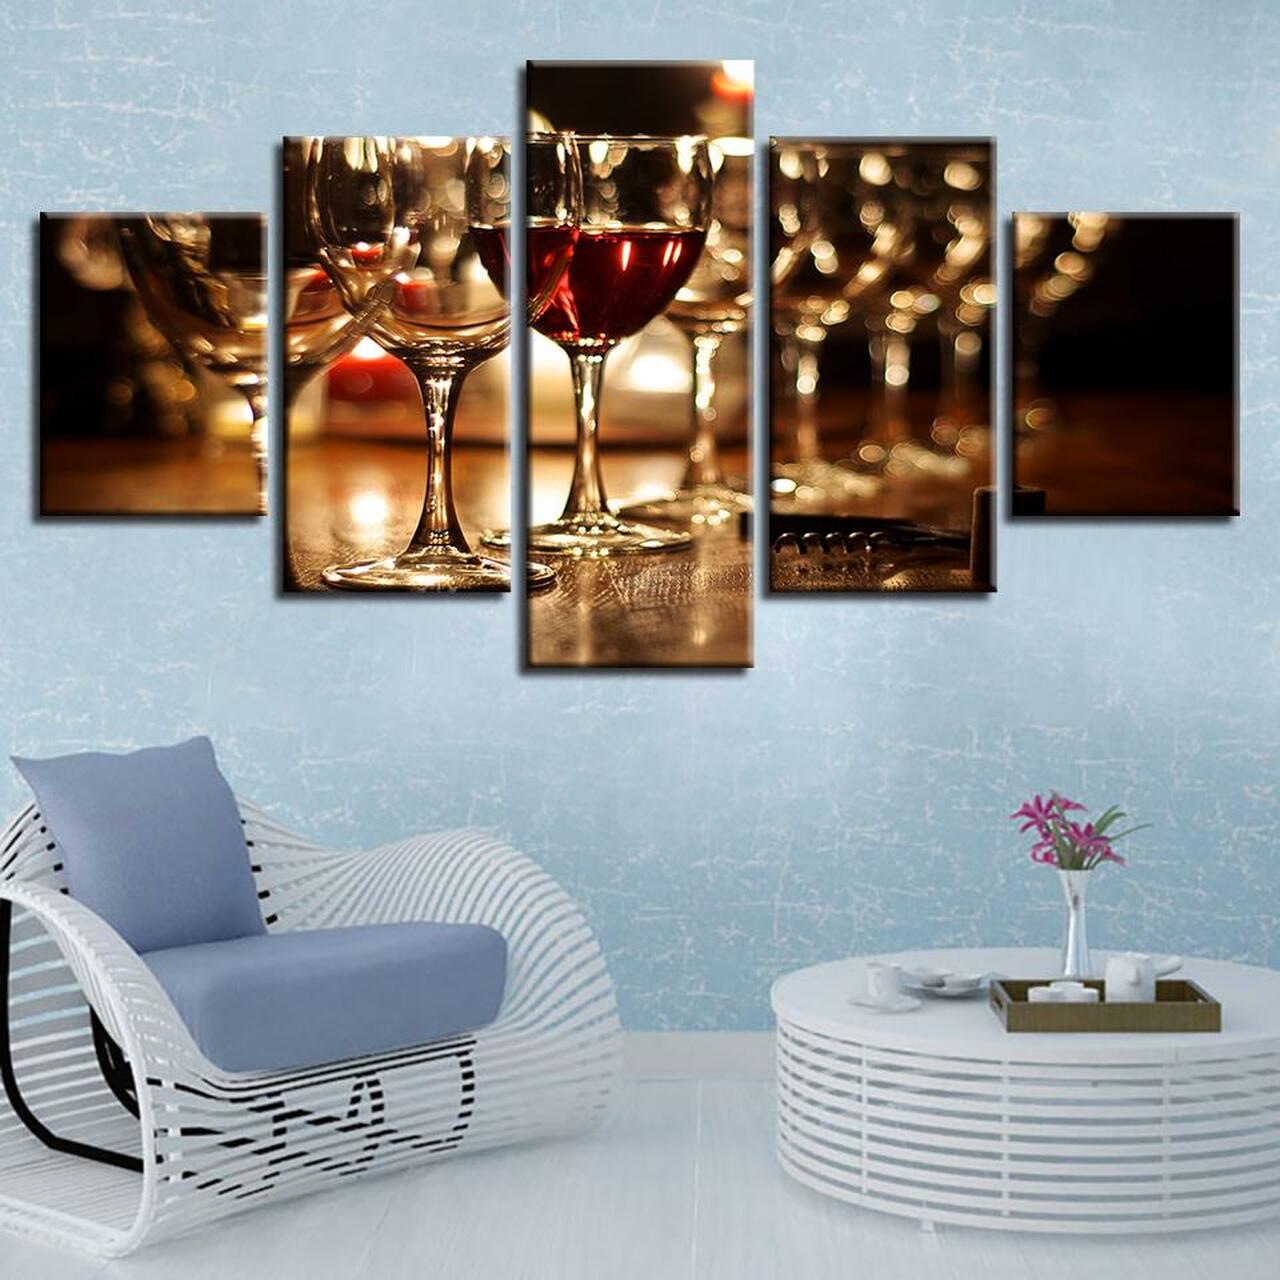 RED WINE GLASSES 5 Piece Canvas Art Wall Decor